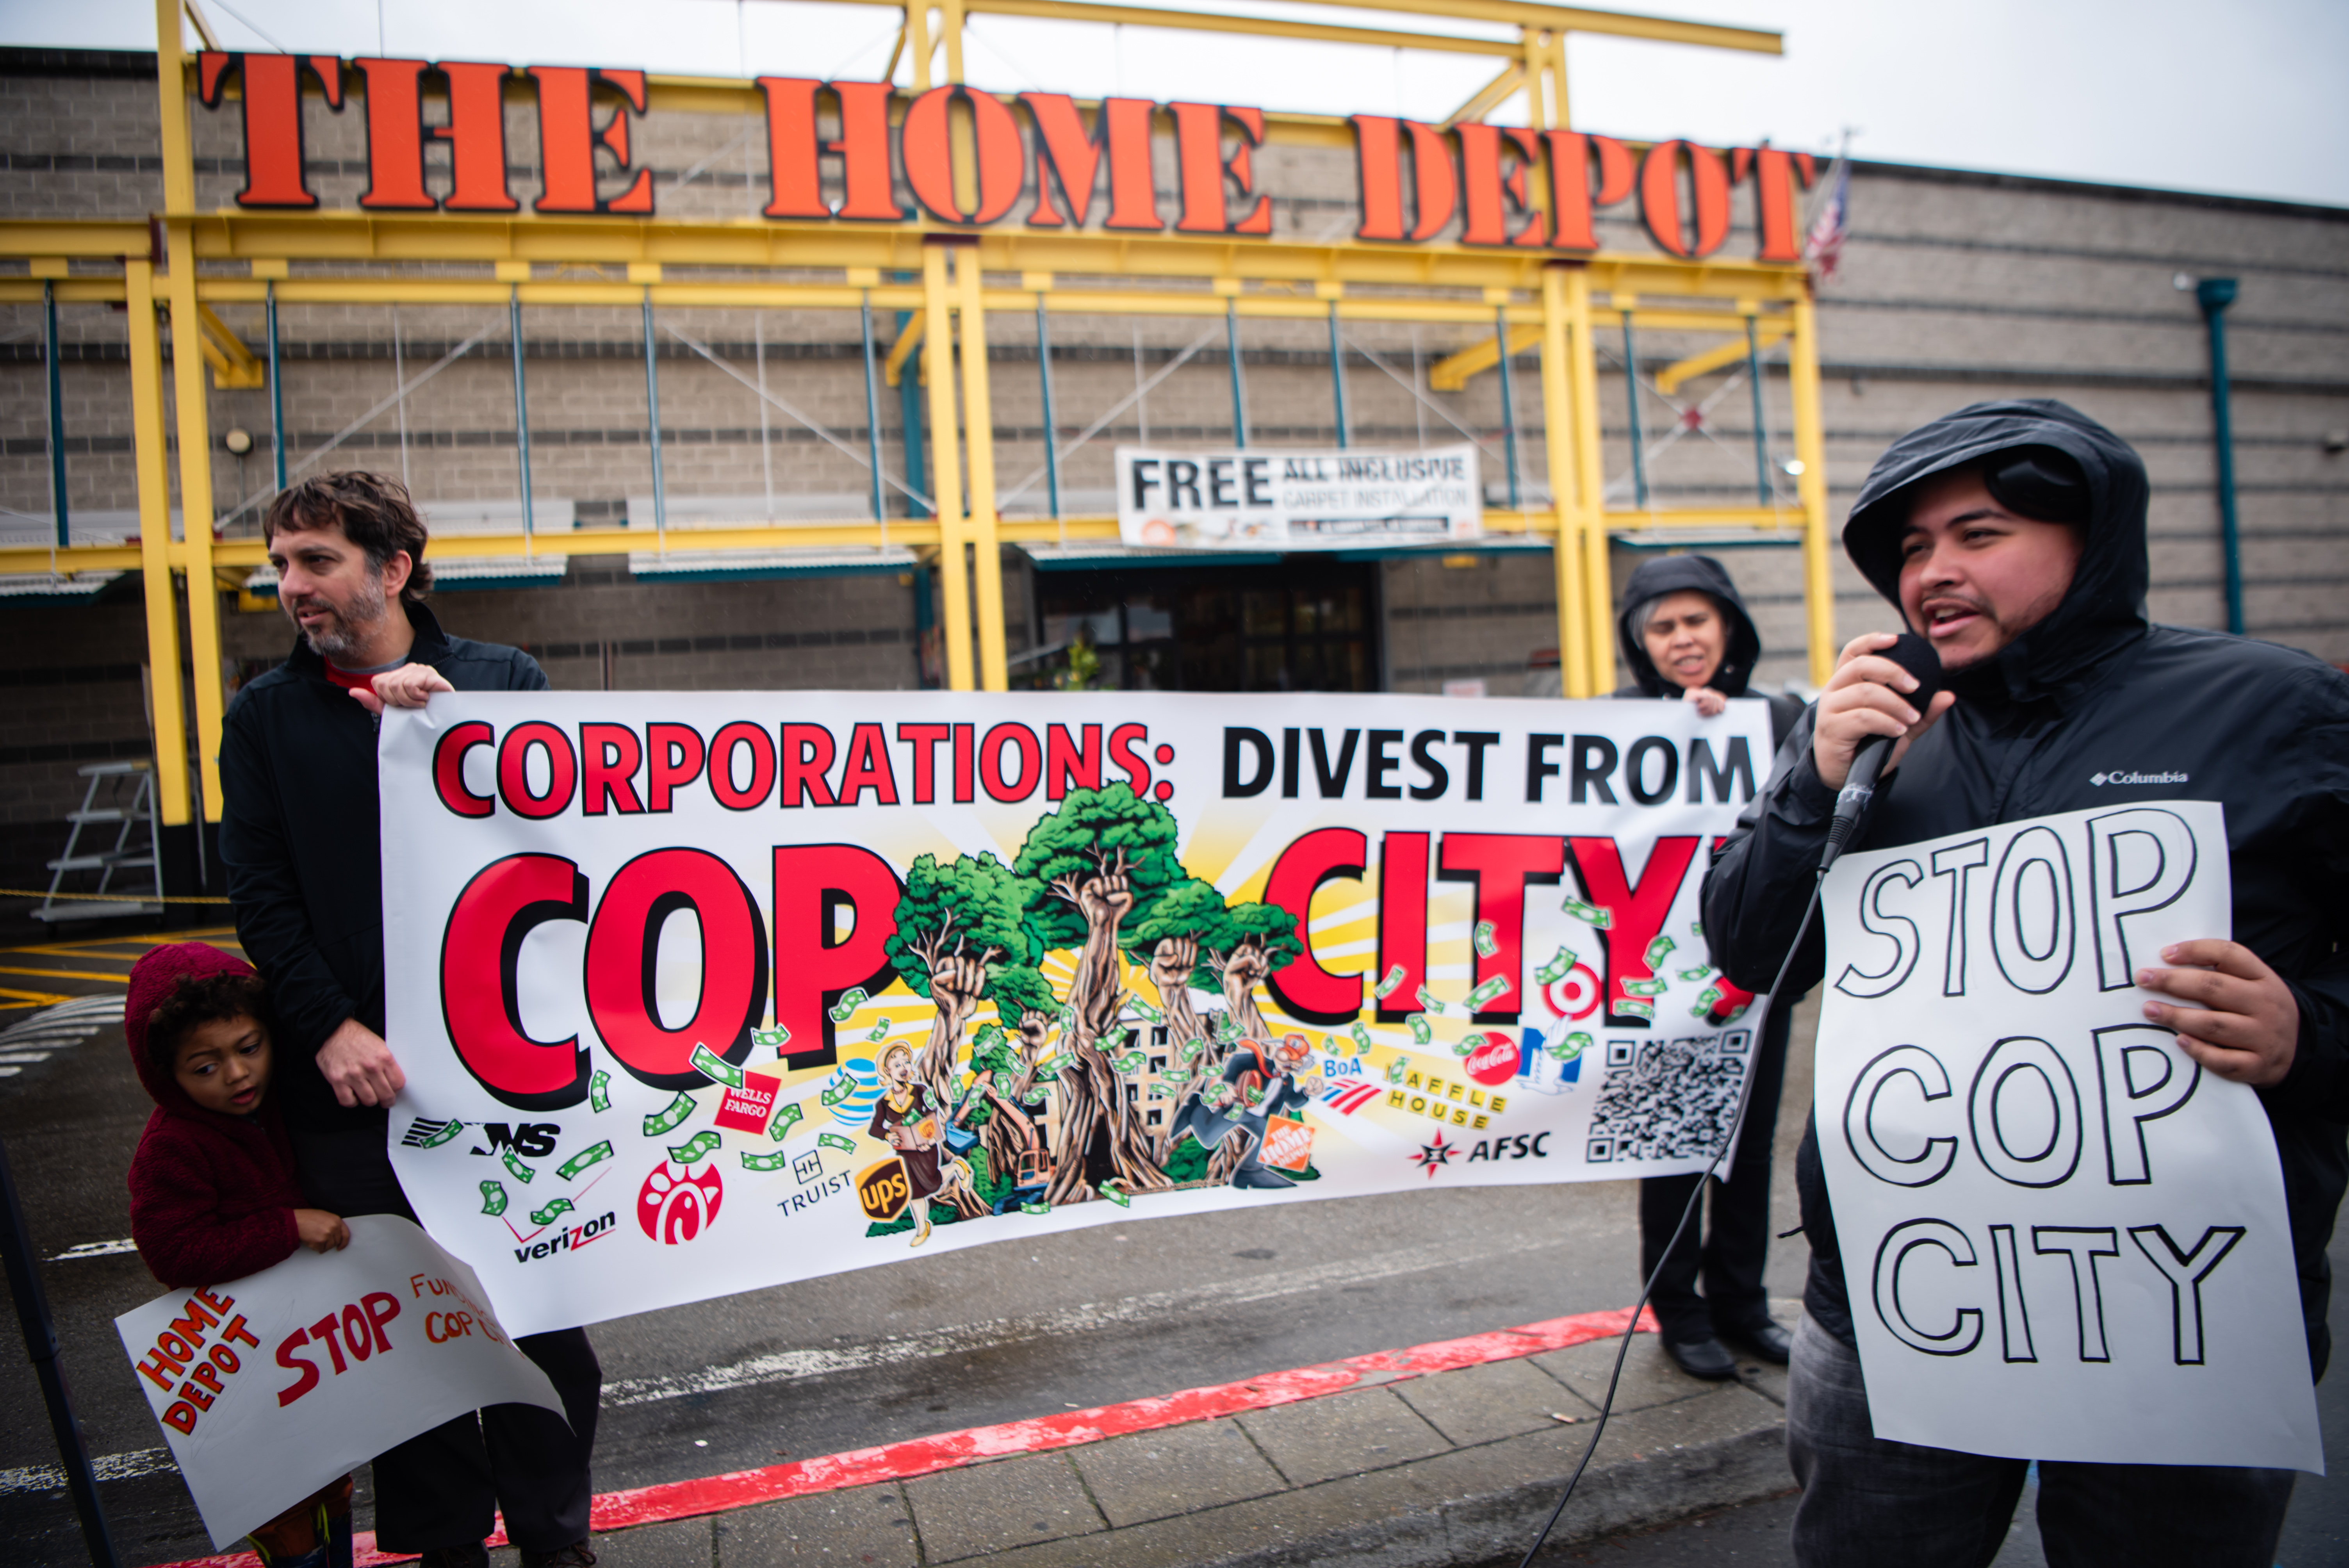 The Companies and Foundations behind Cop City